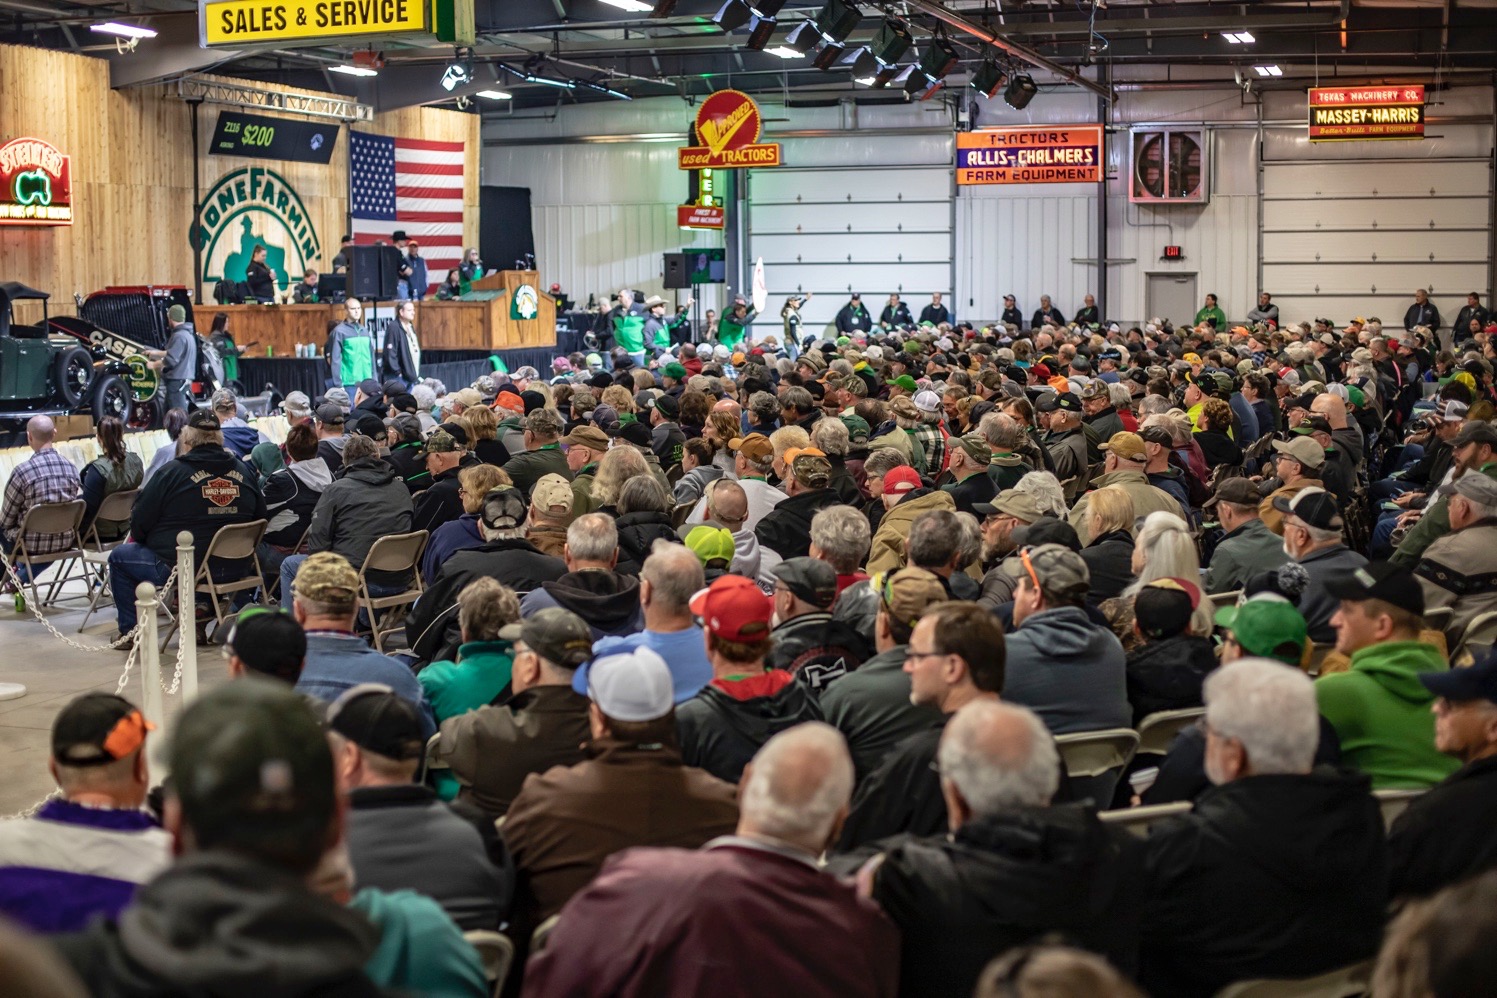 Vintage tractors, 95 percent sell-through at Mecum’s vintage tractor auction, ClassicCars.com Journal